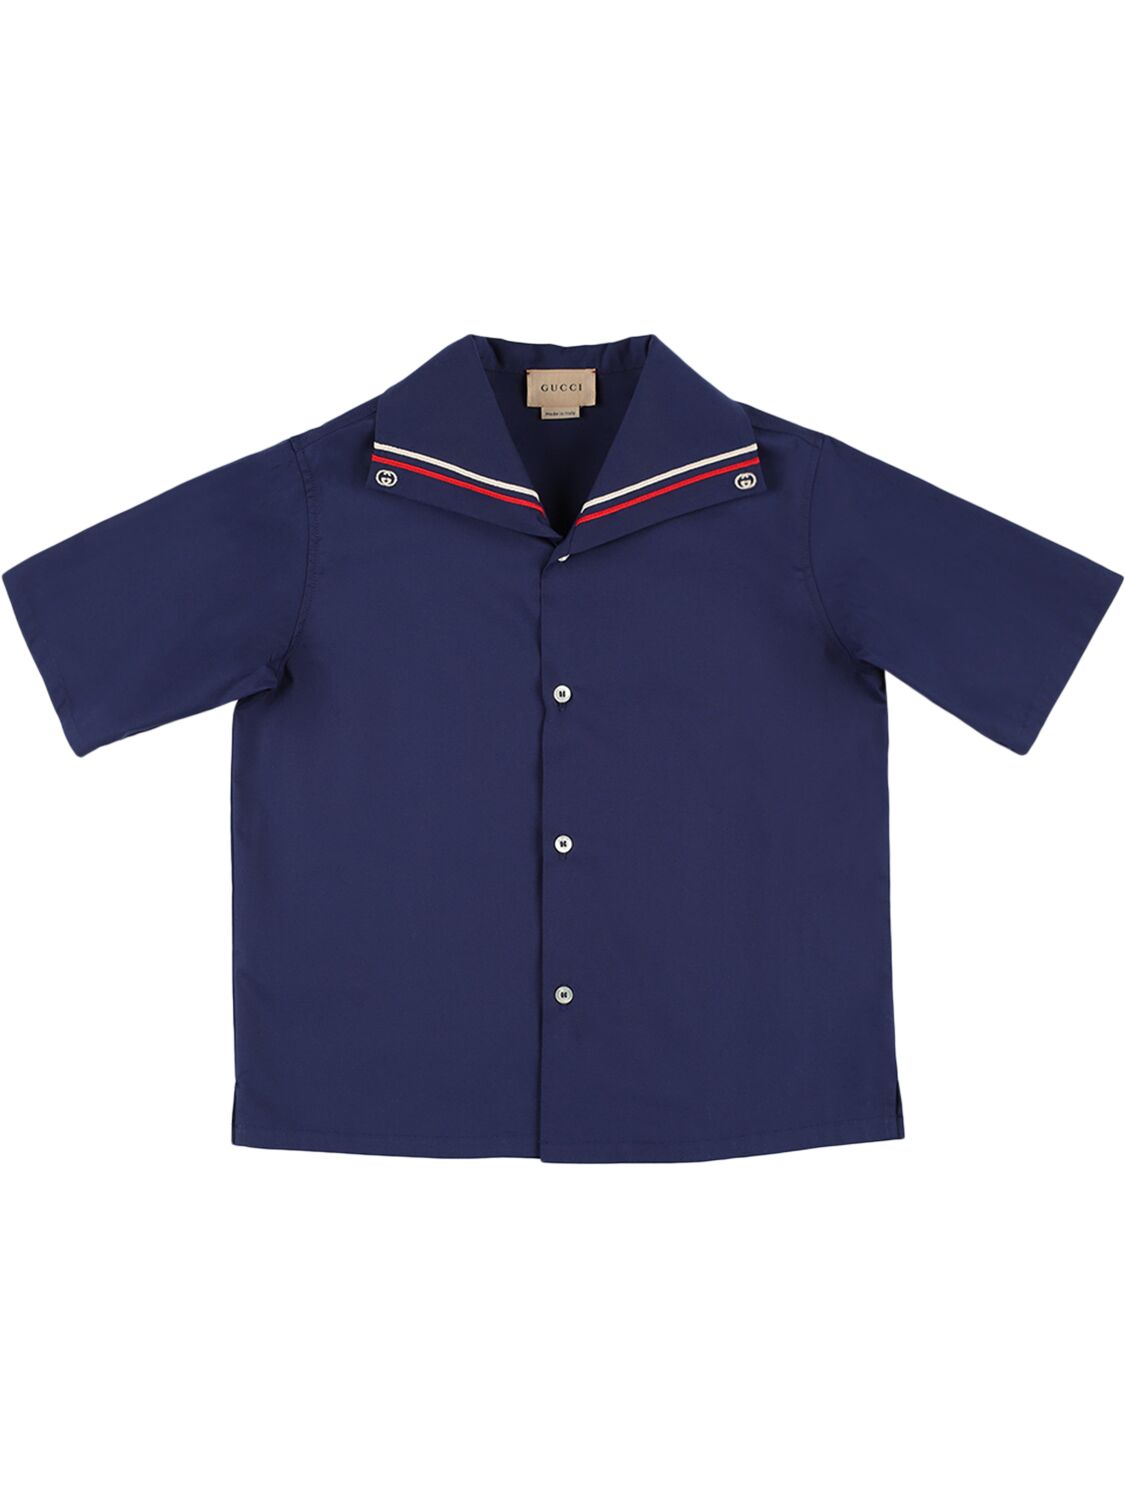 Image of Cotton Blend Polo Shirt